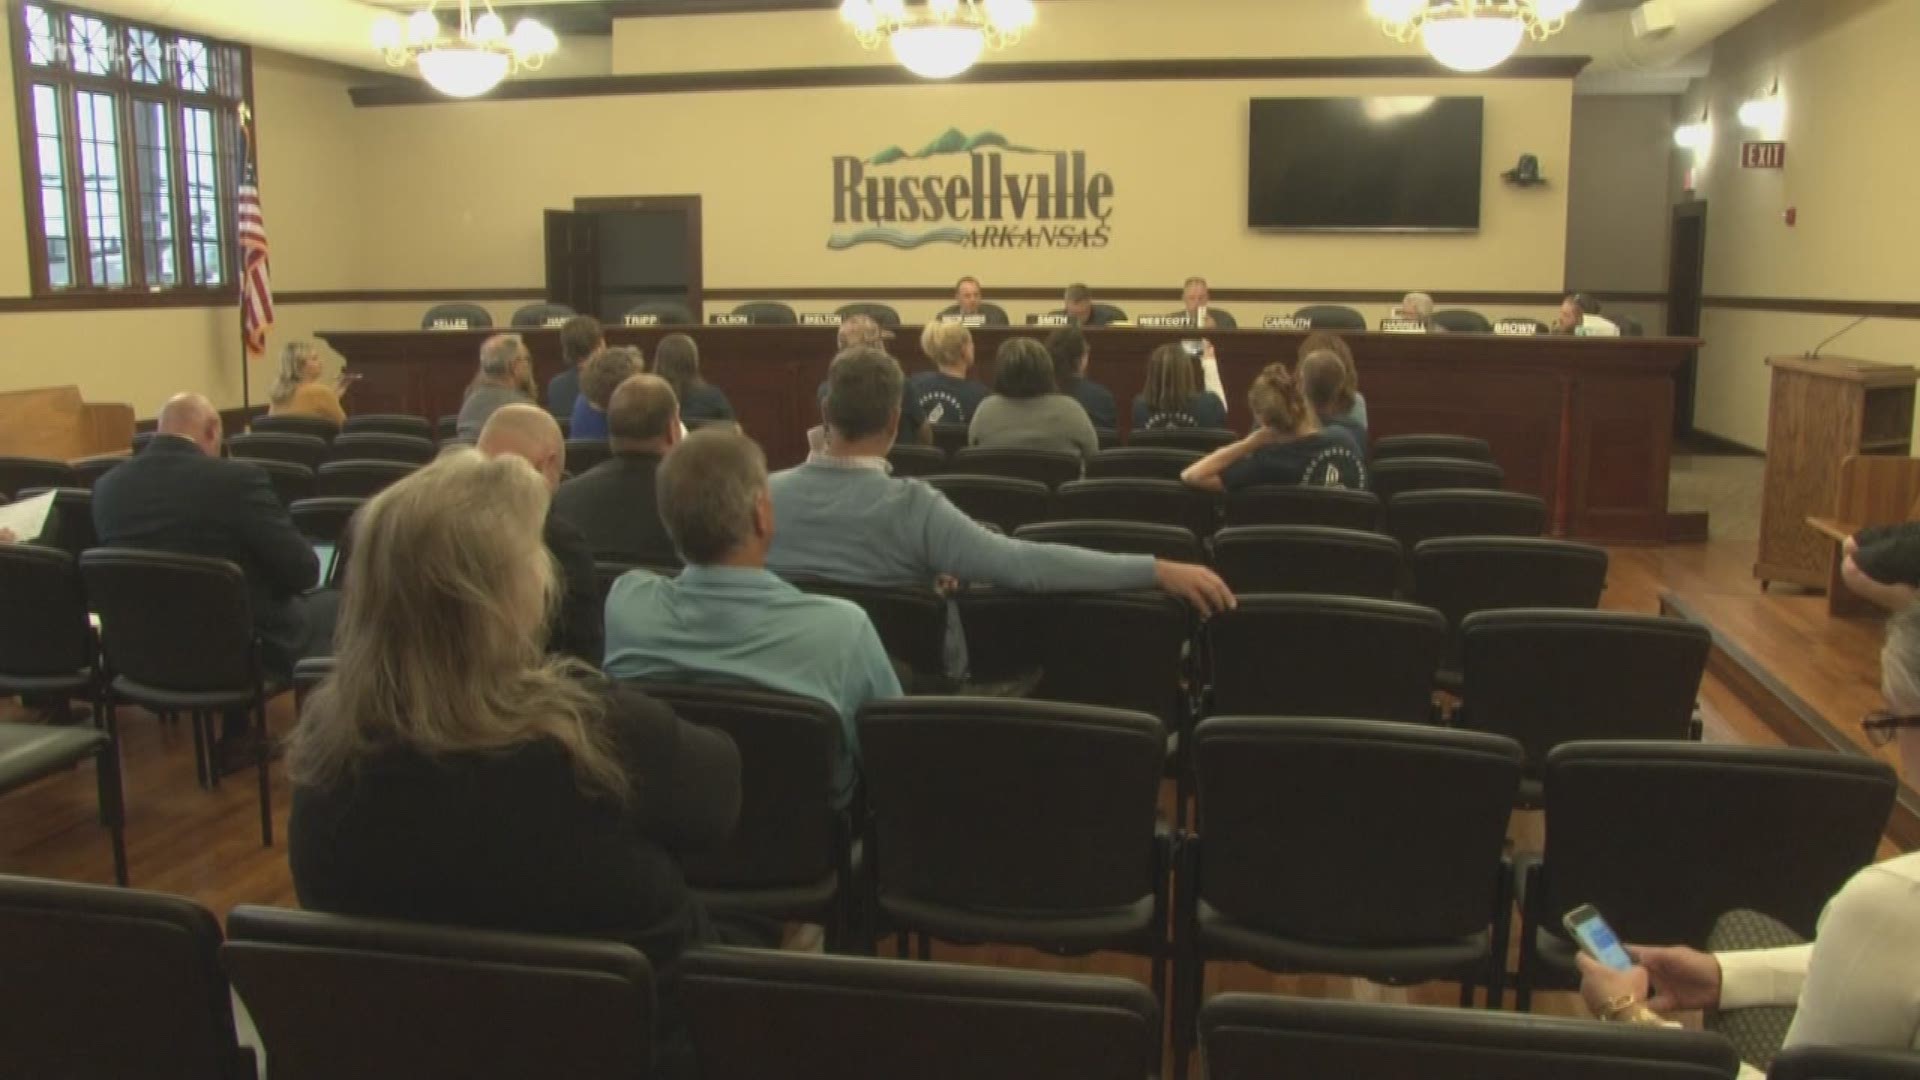 The committee charged with vetting casino companies for the City of Russellville picked a favorite Monday night.